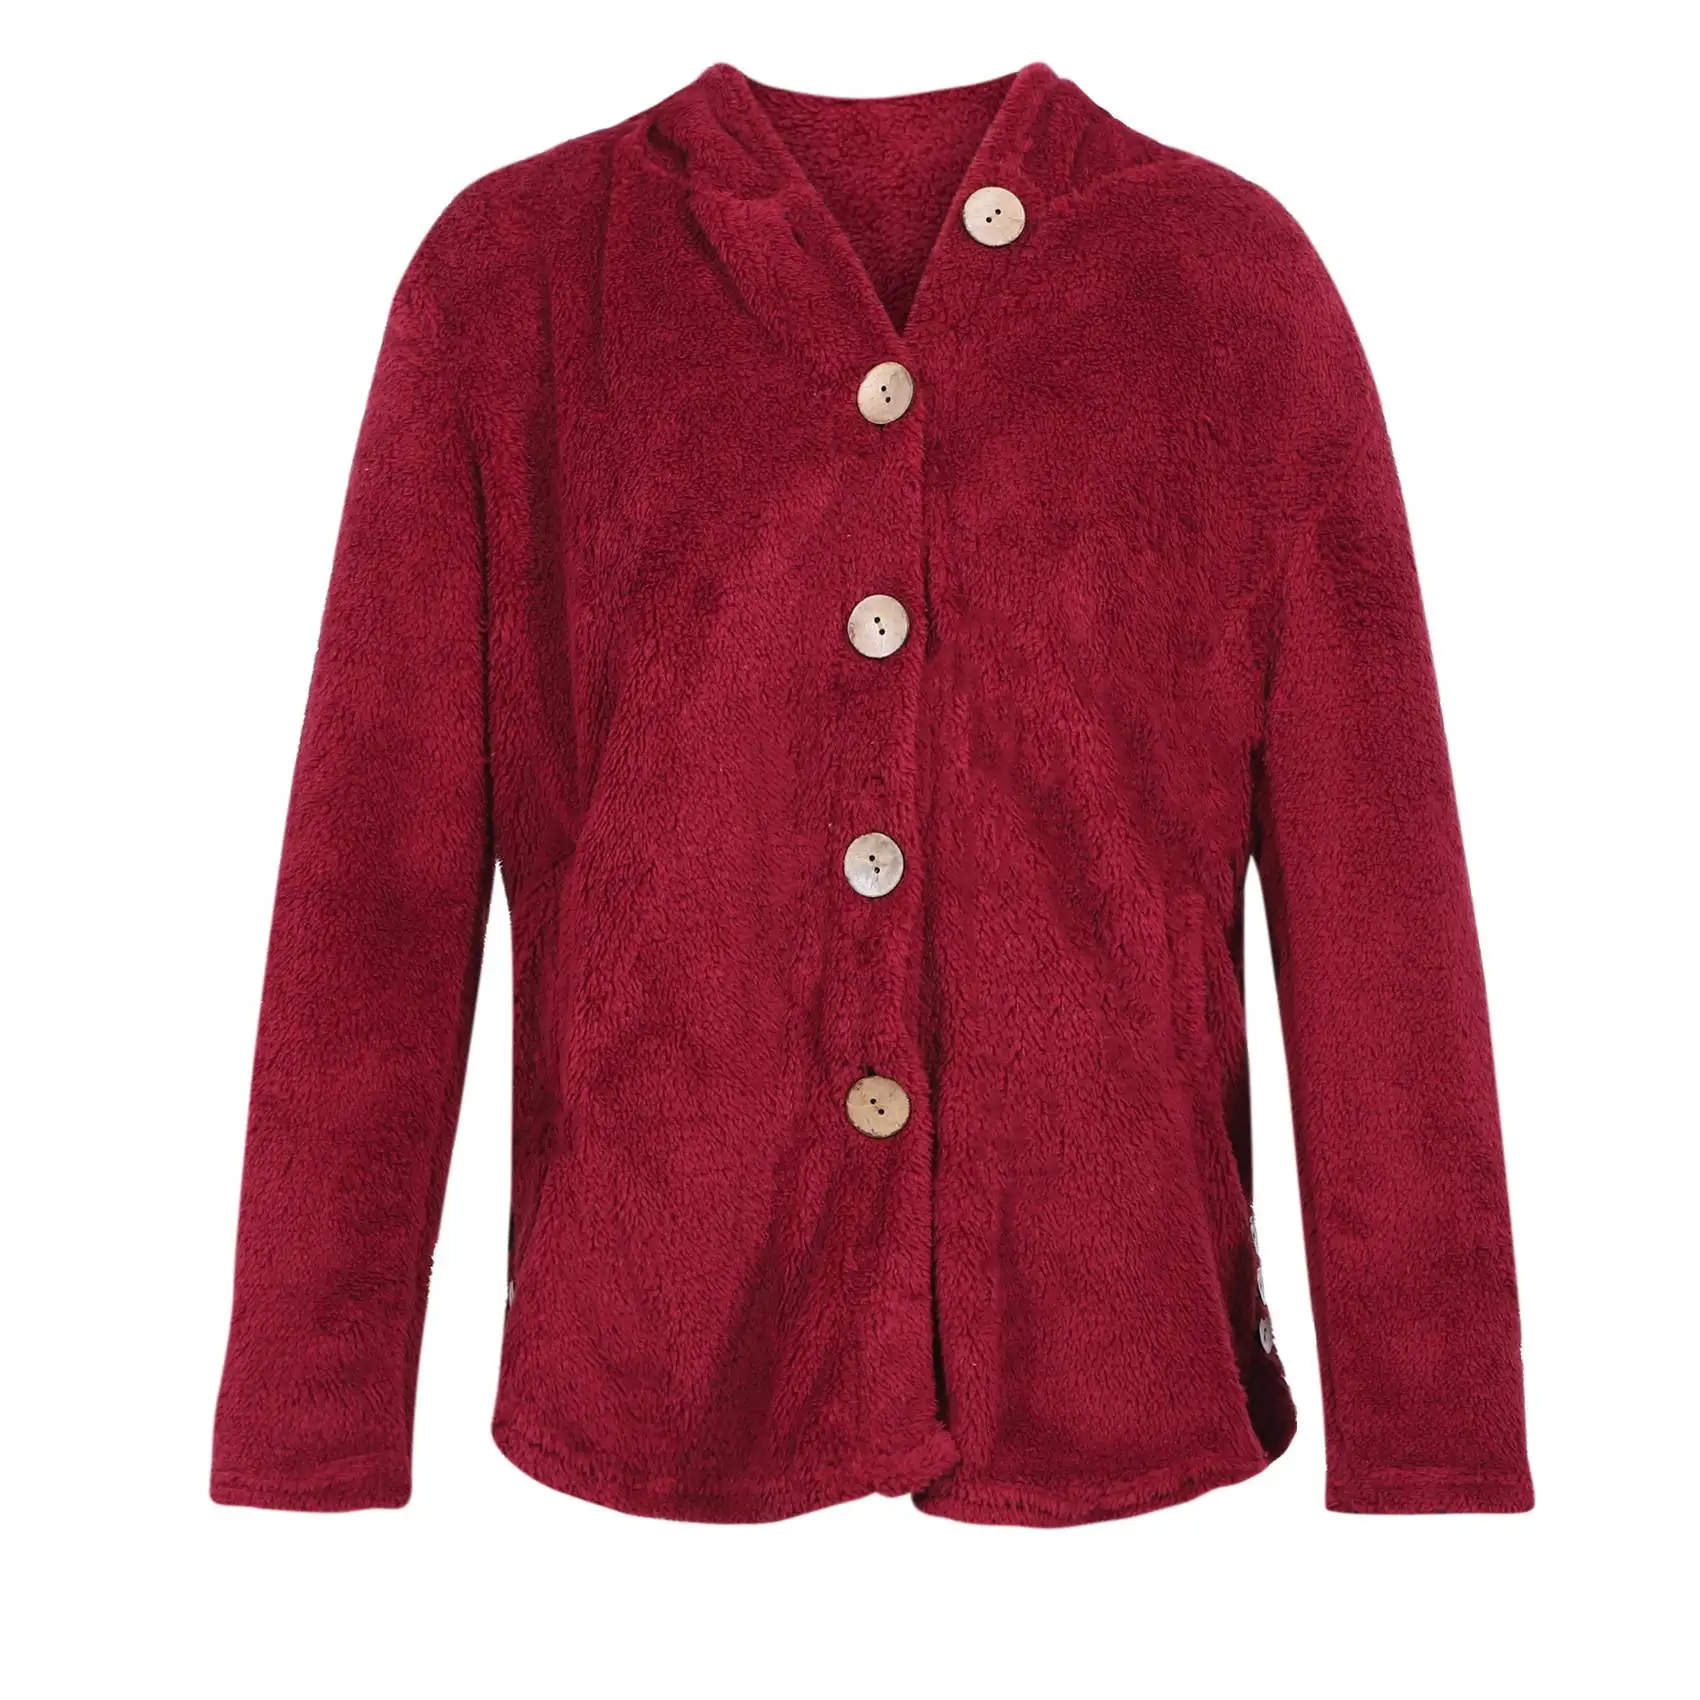 

Womens Coat Oversize Size Button Plush Tops Hooded Loose Cardigan Outwear Winter Jacket,Wine Red L